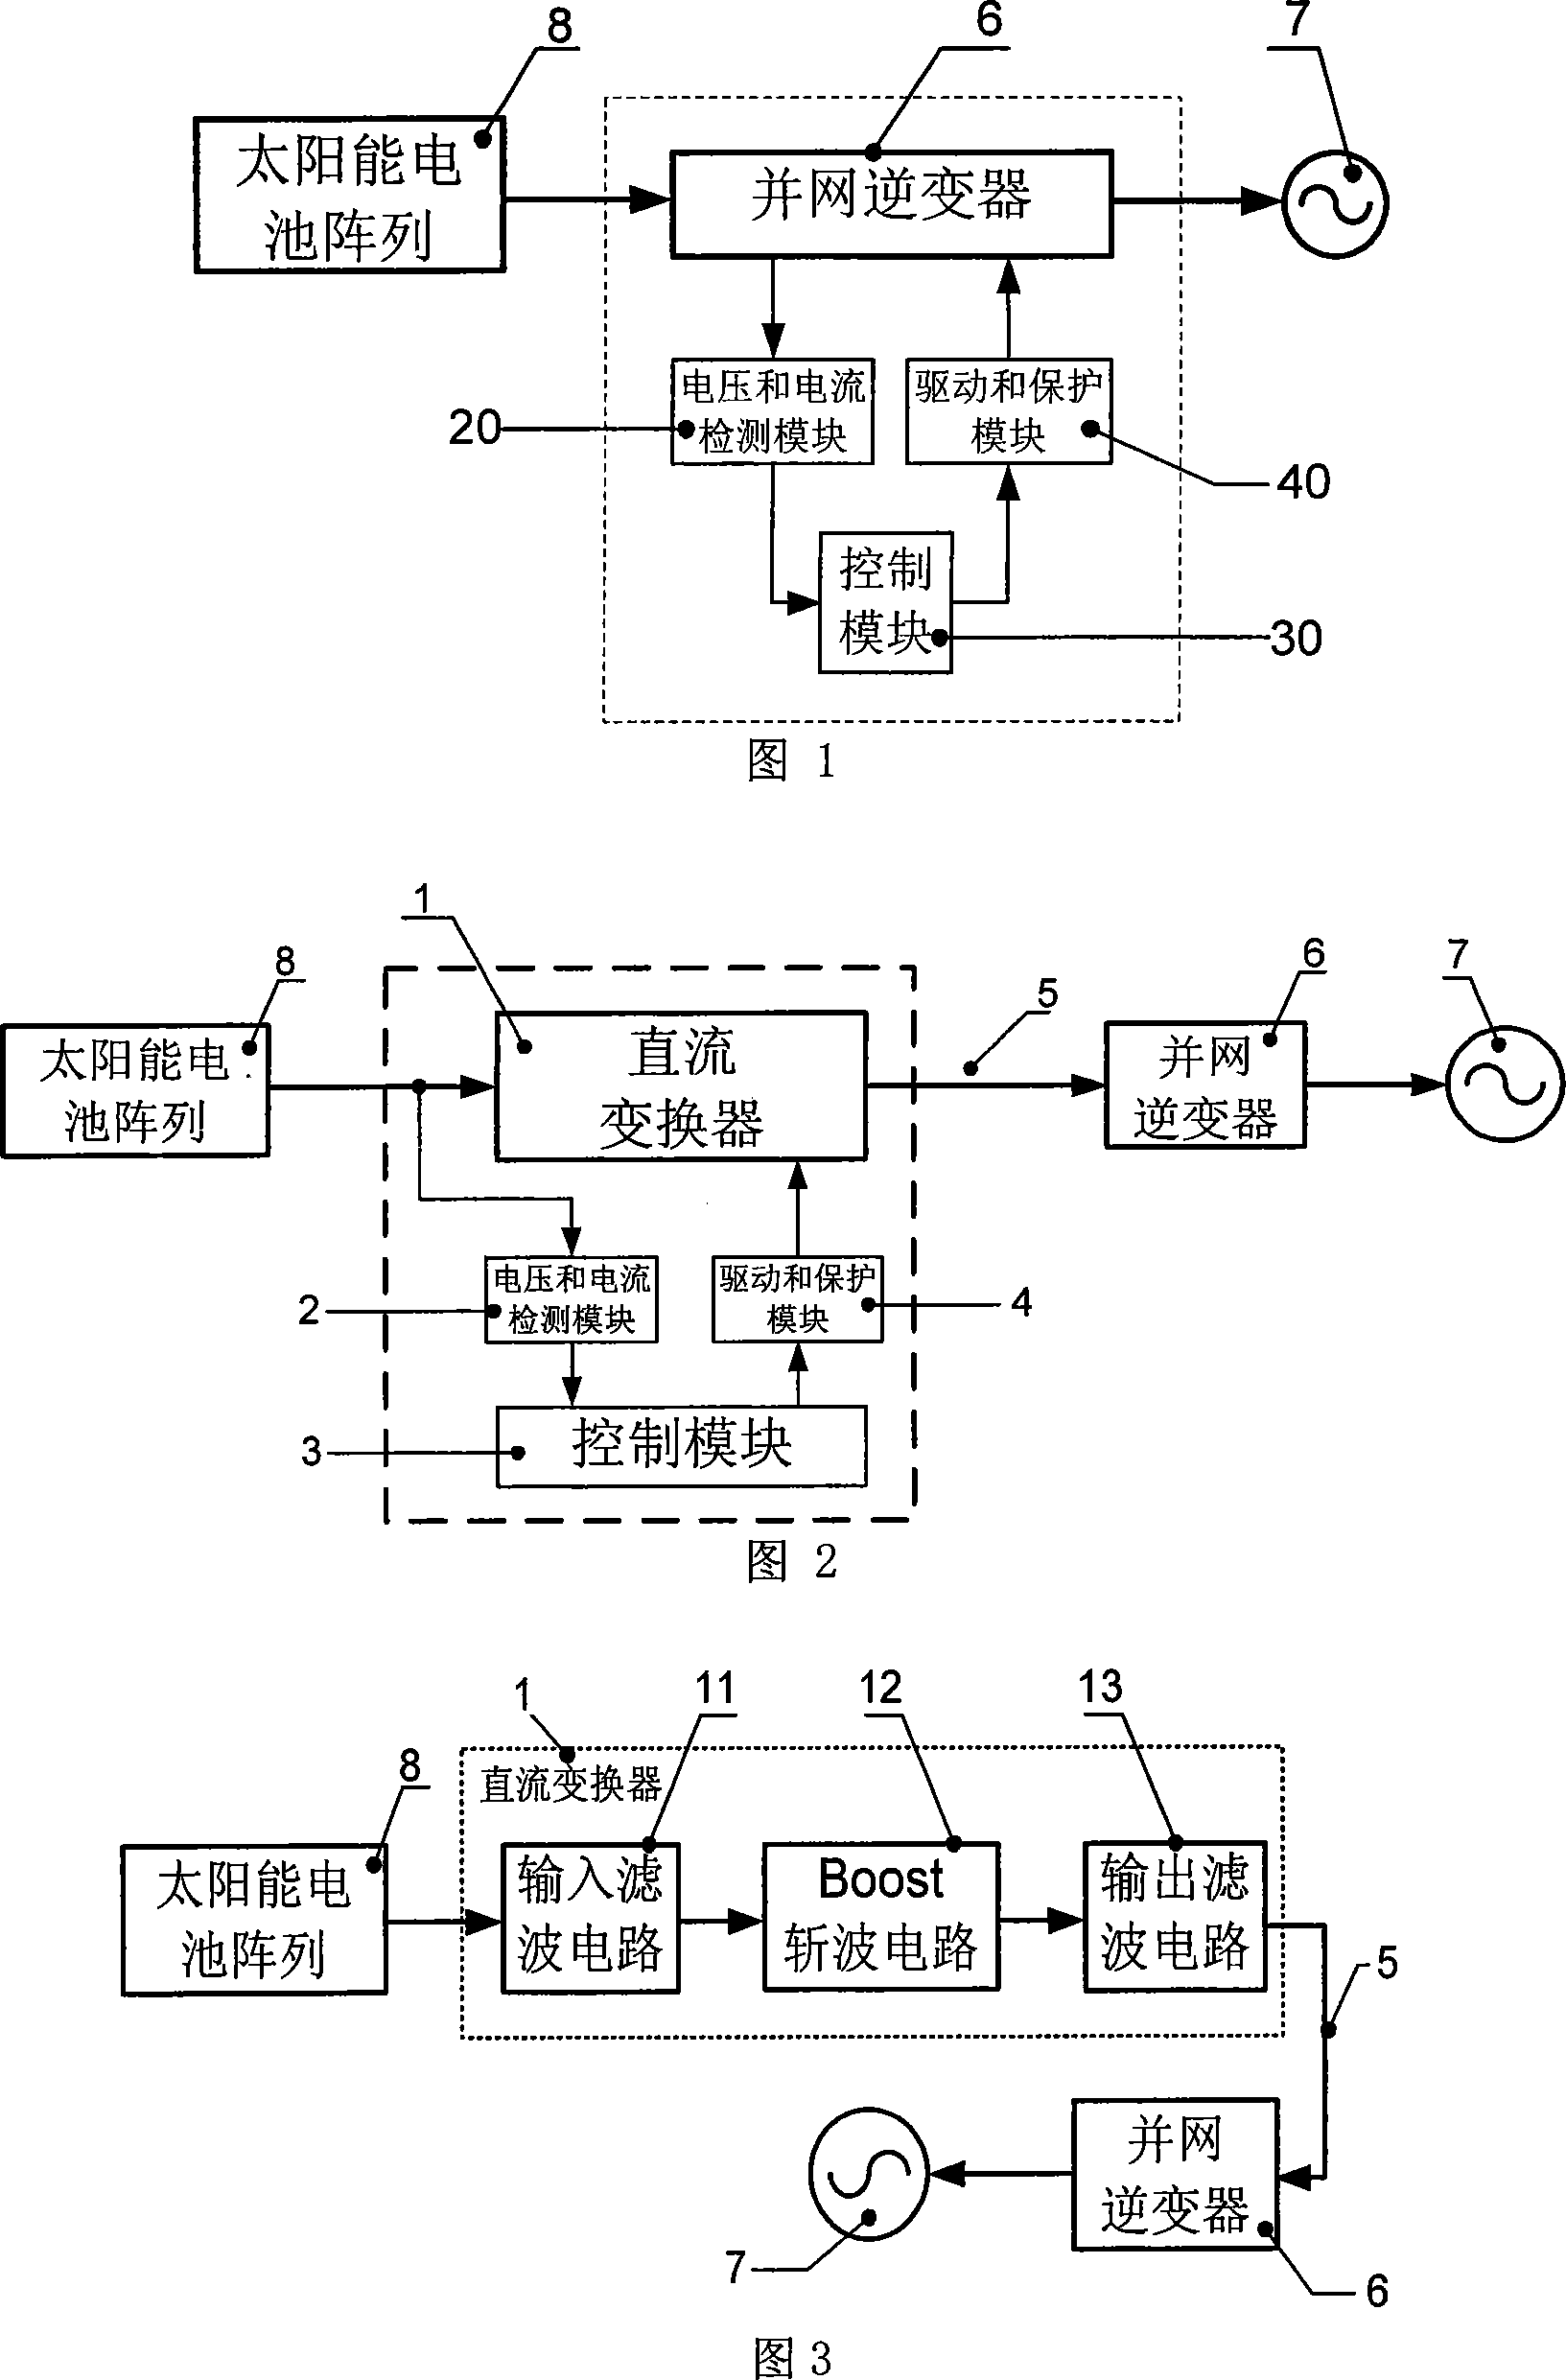 Photovoltaic power generation tracking controller based on digital signal processor